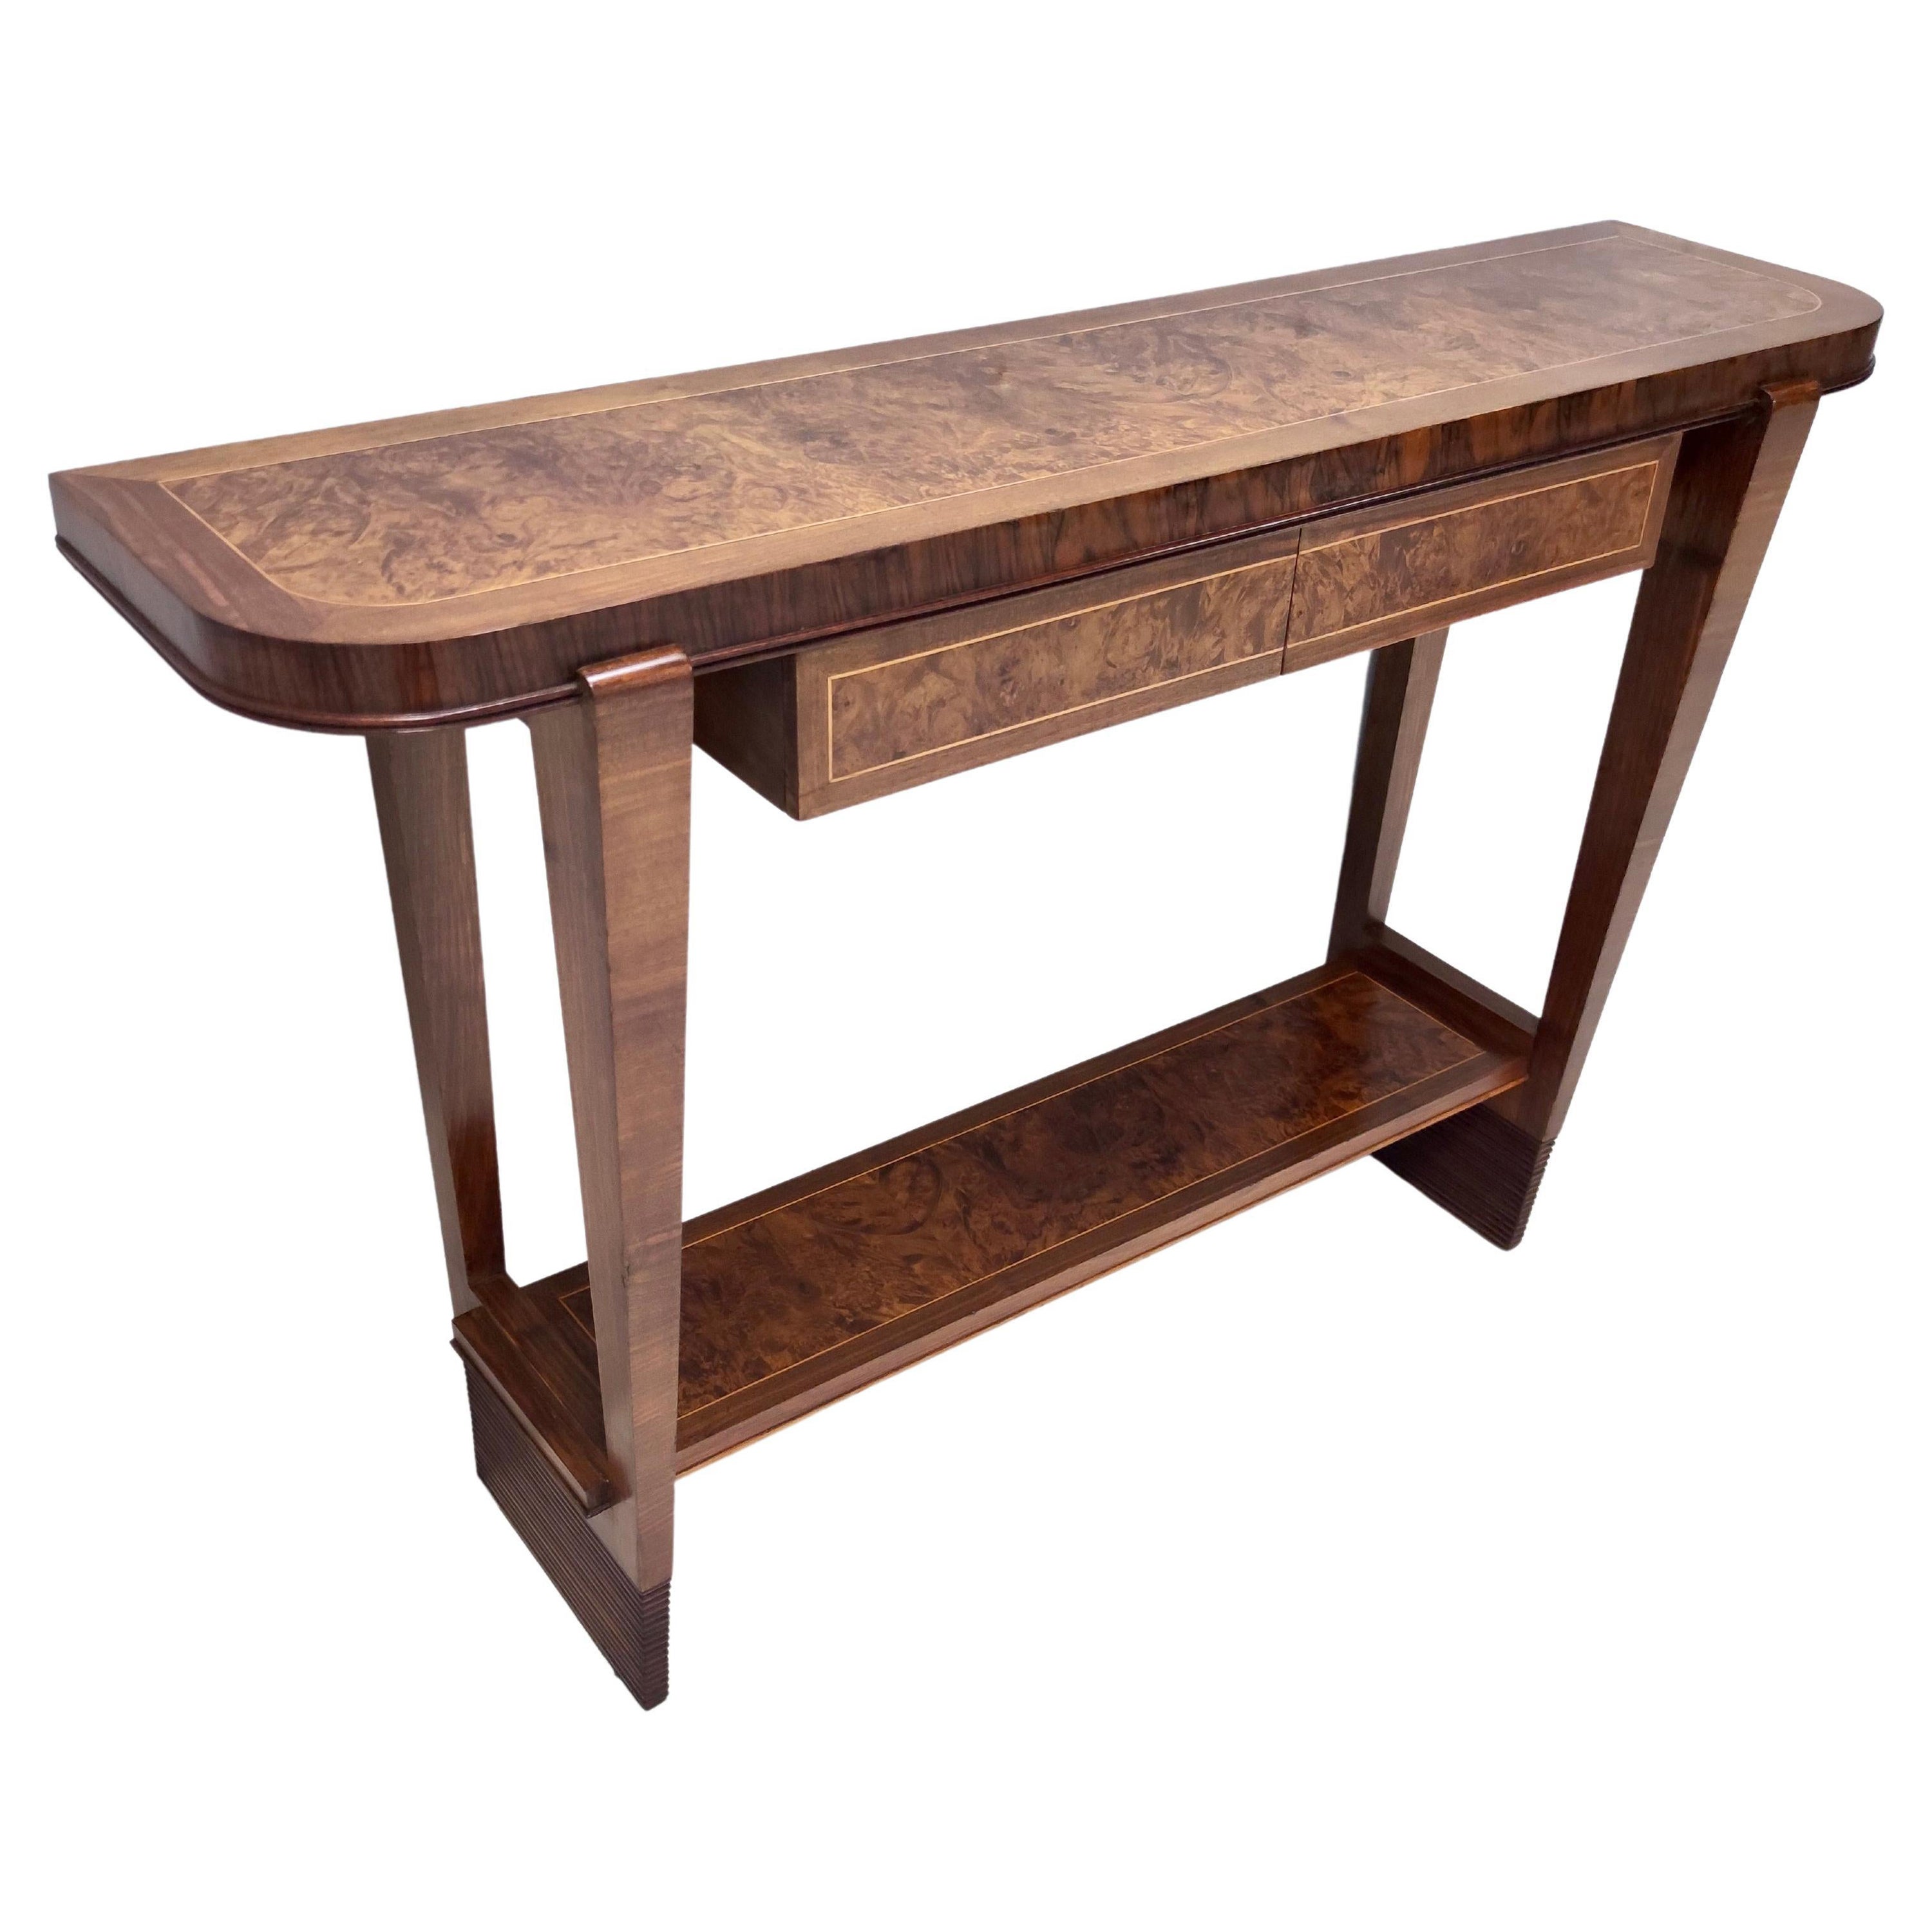 Vintage Walnut Console Table Ascribable to Paolo Buffa with Two Drawers, Italy